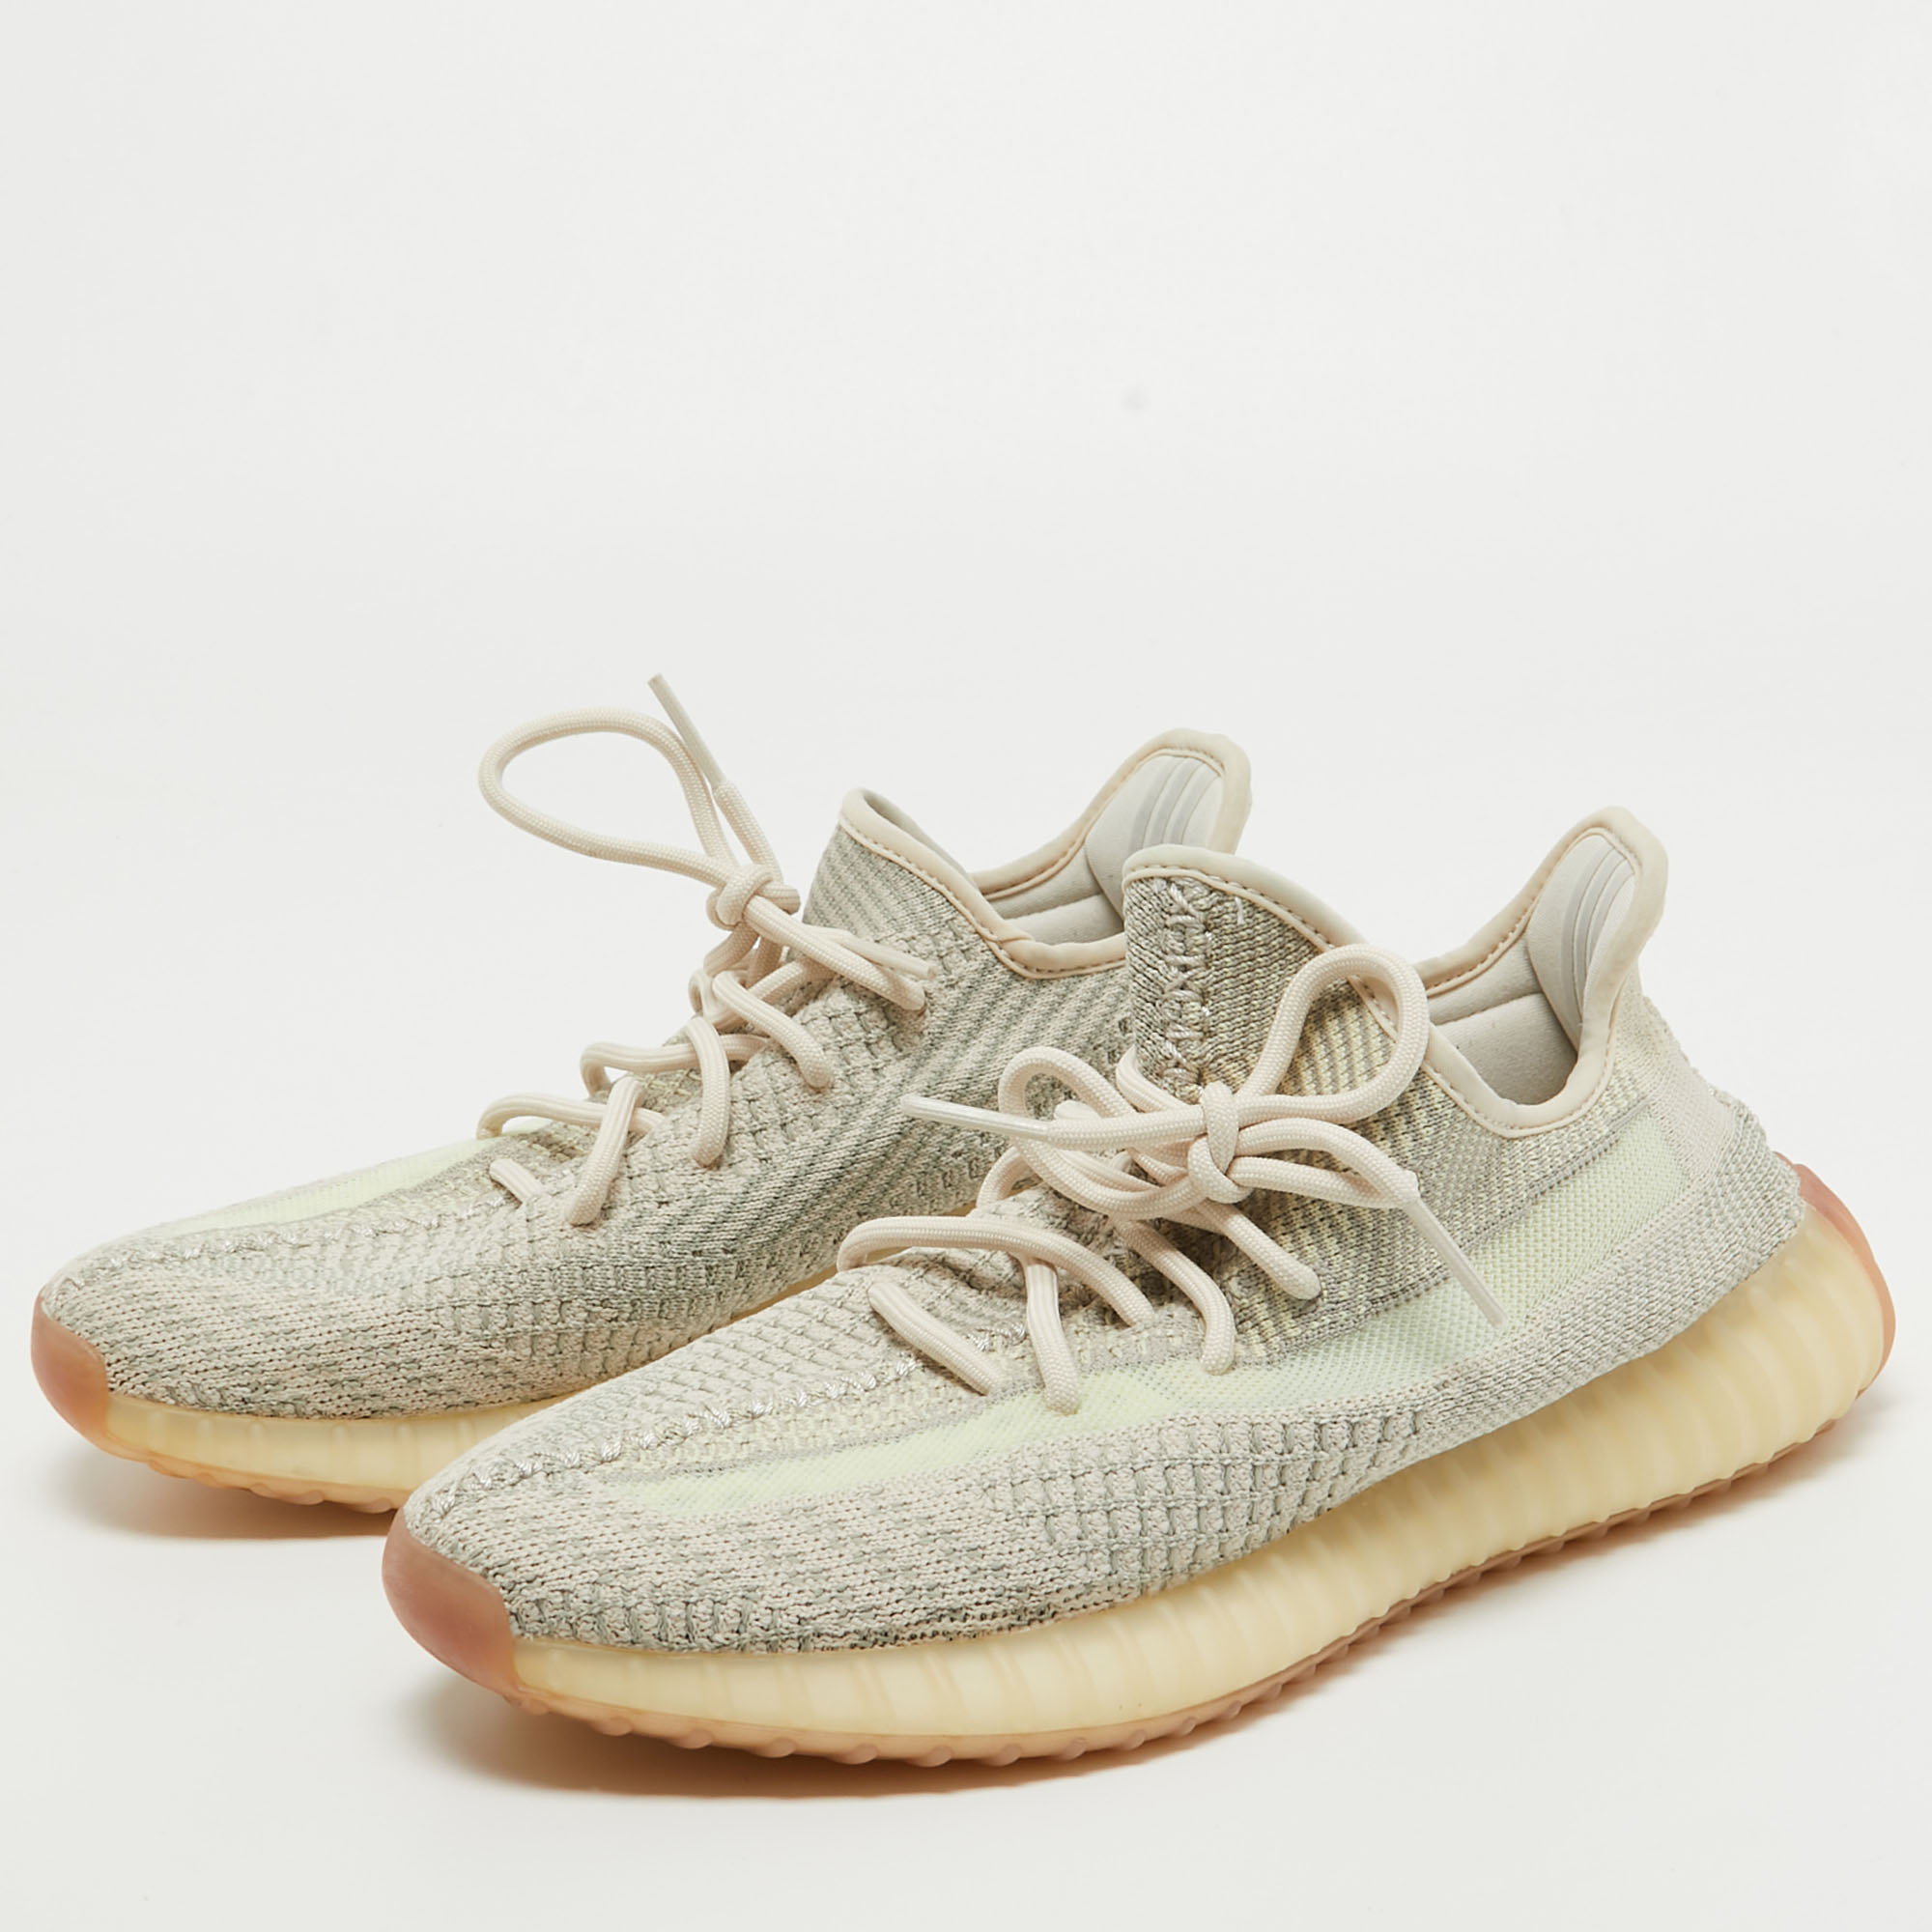 

Yeezy x Adidas Beige Knit Fabric Boost 350 V2Blue Tint Sneakers Size 42 2/3